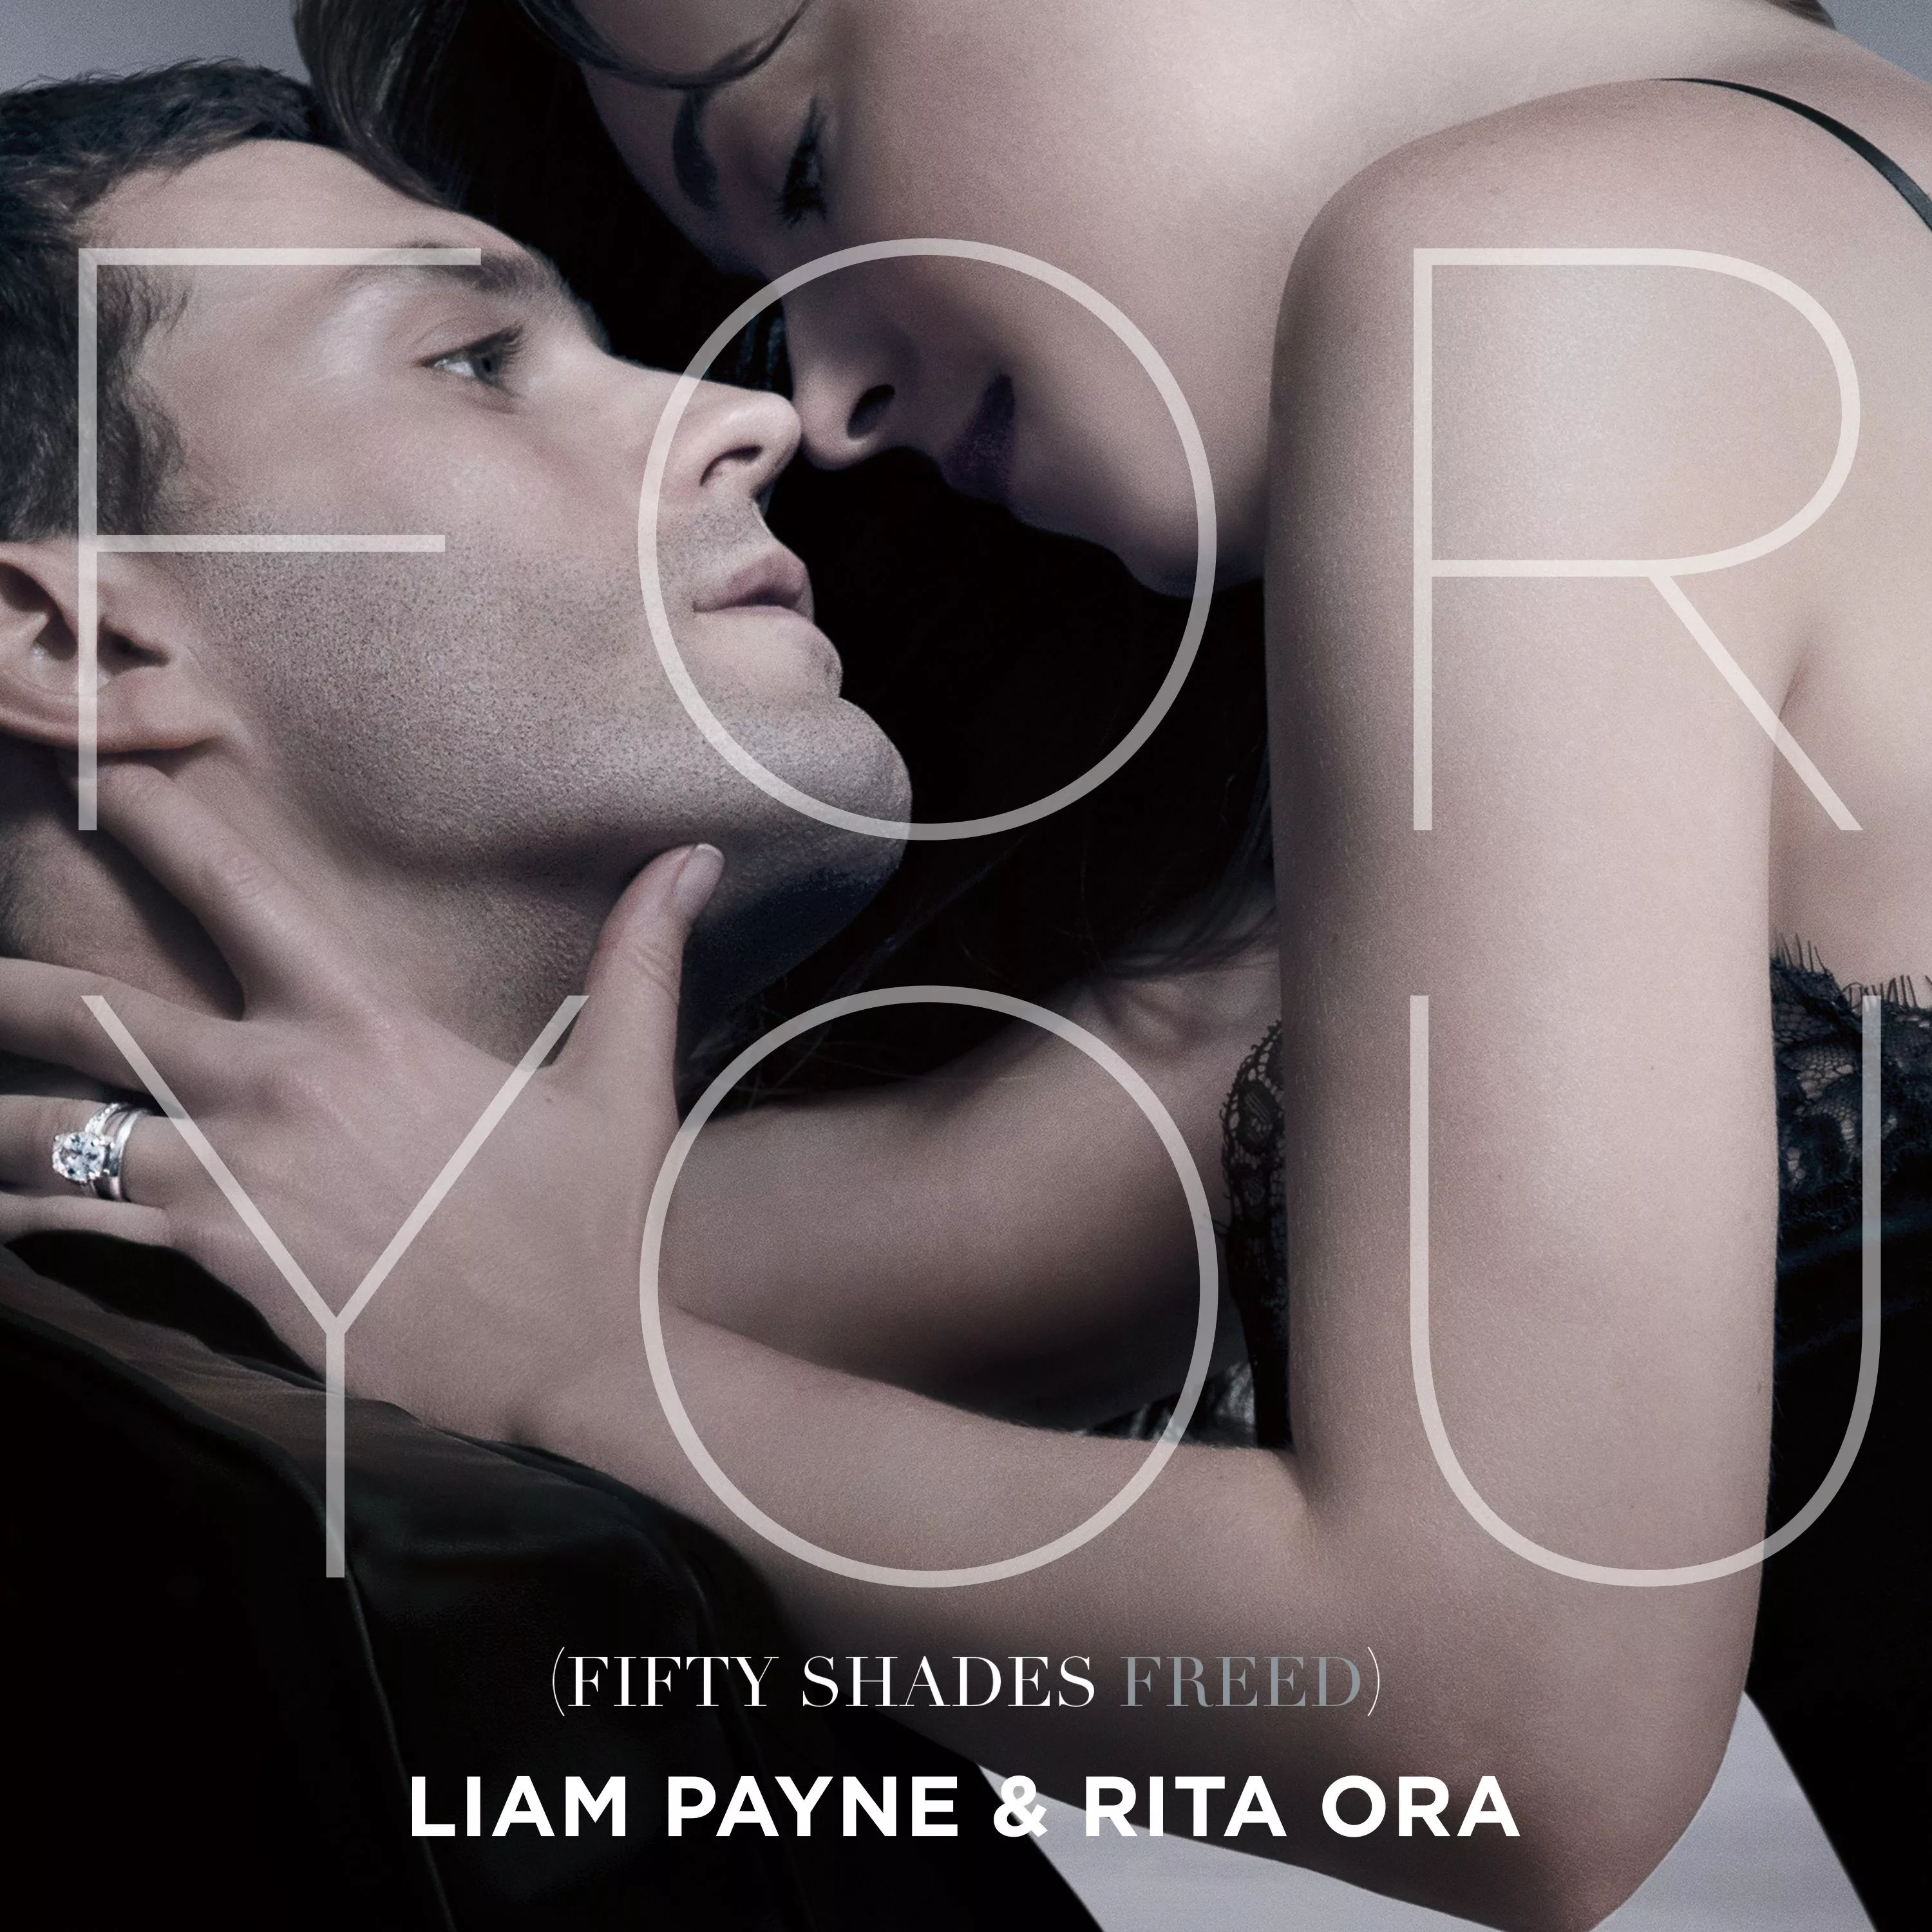 Liam Payne & Rita Ora For You (Fifty Shades Freed) cover artwork